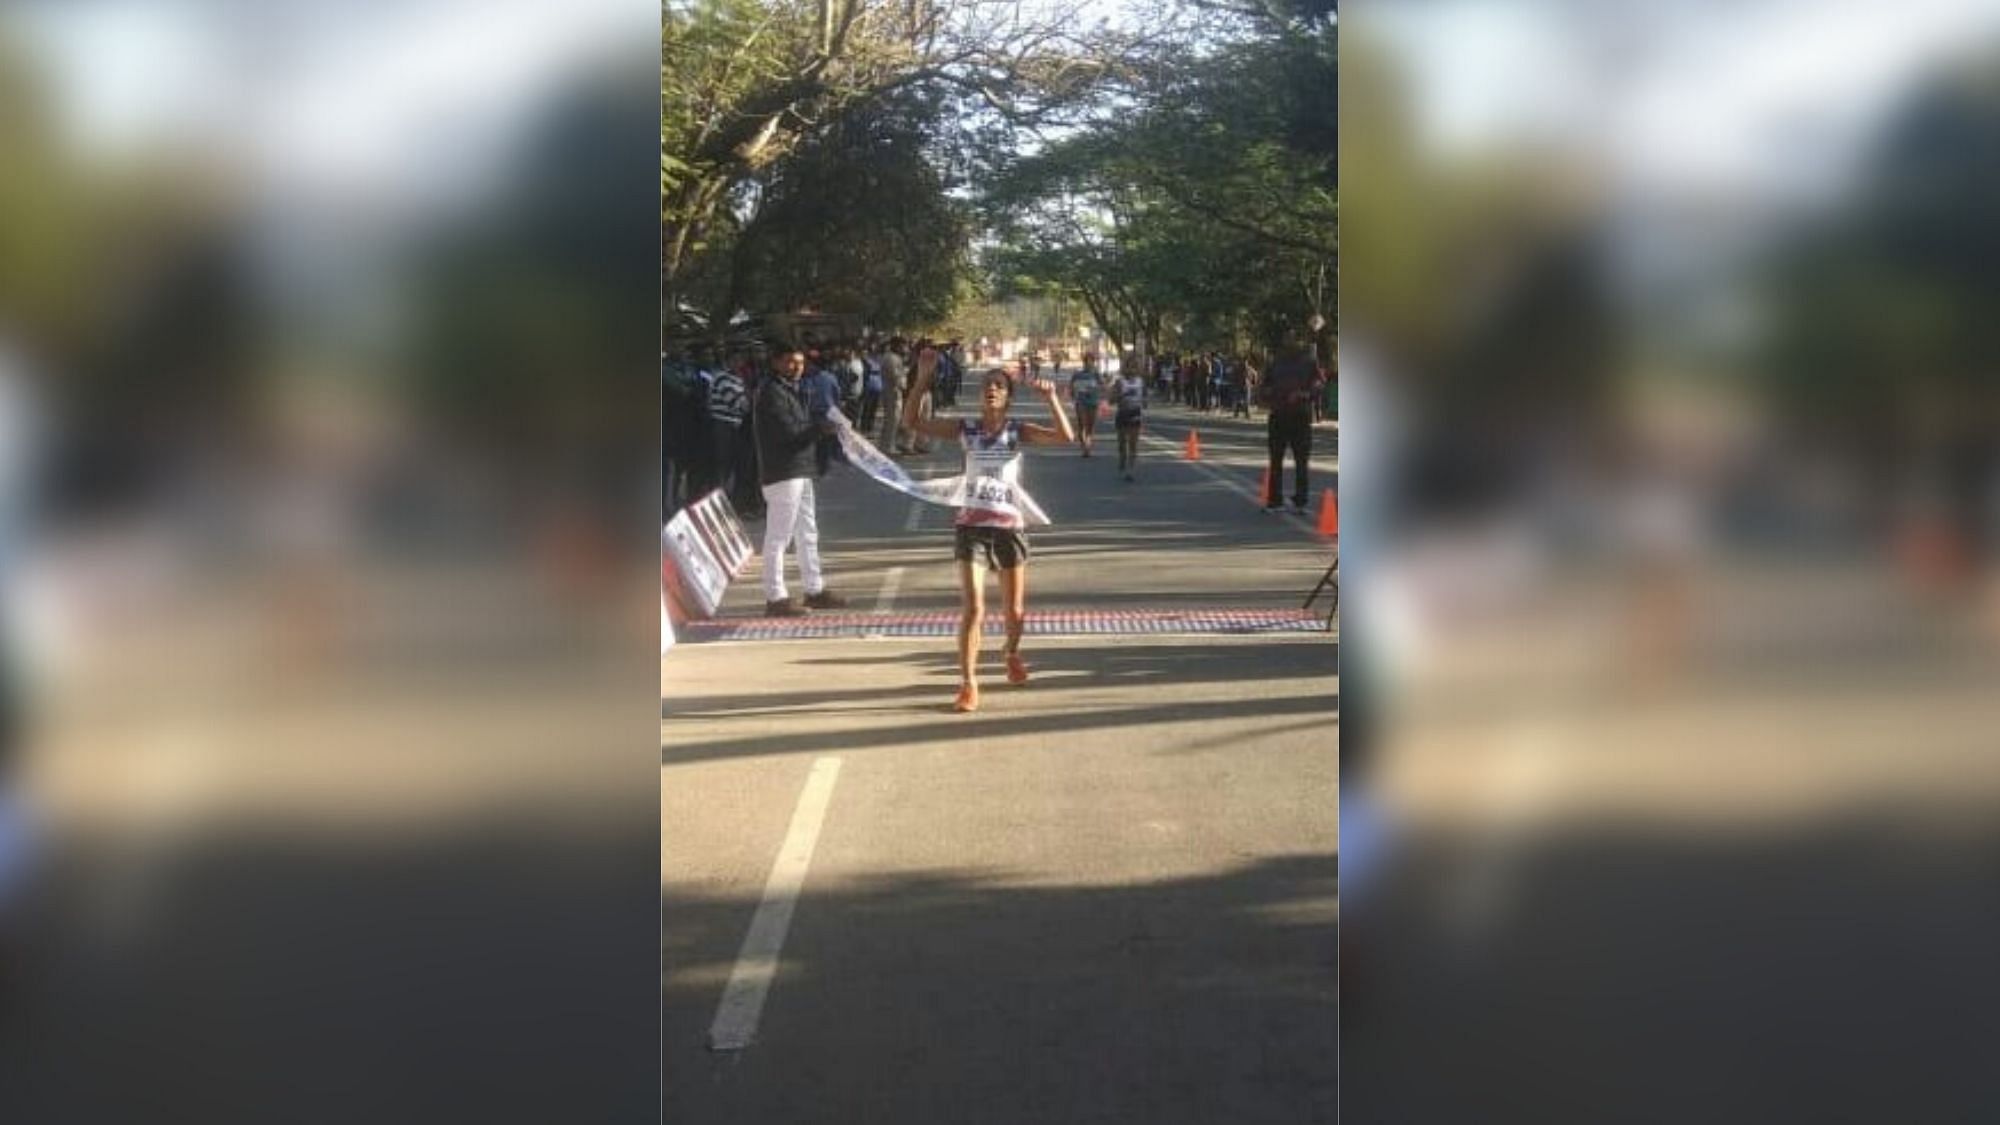 The 23-year-old athlete, who hails from a poor farmer’s family at Kabra village in Rajasthan’s Rajsamand district, clocked 1 hour 29 minutes and 54 seconds.